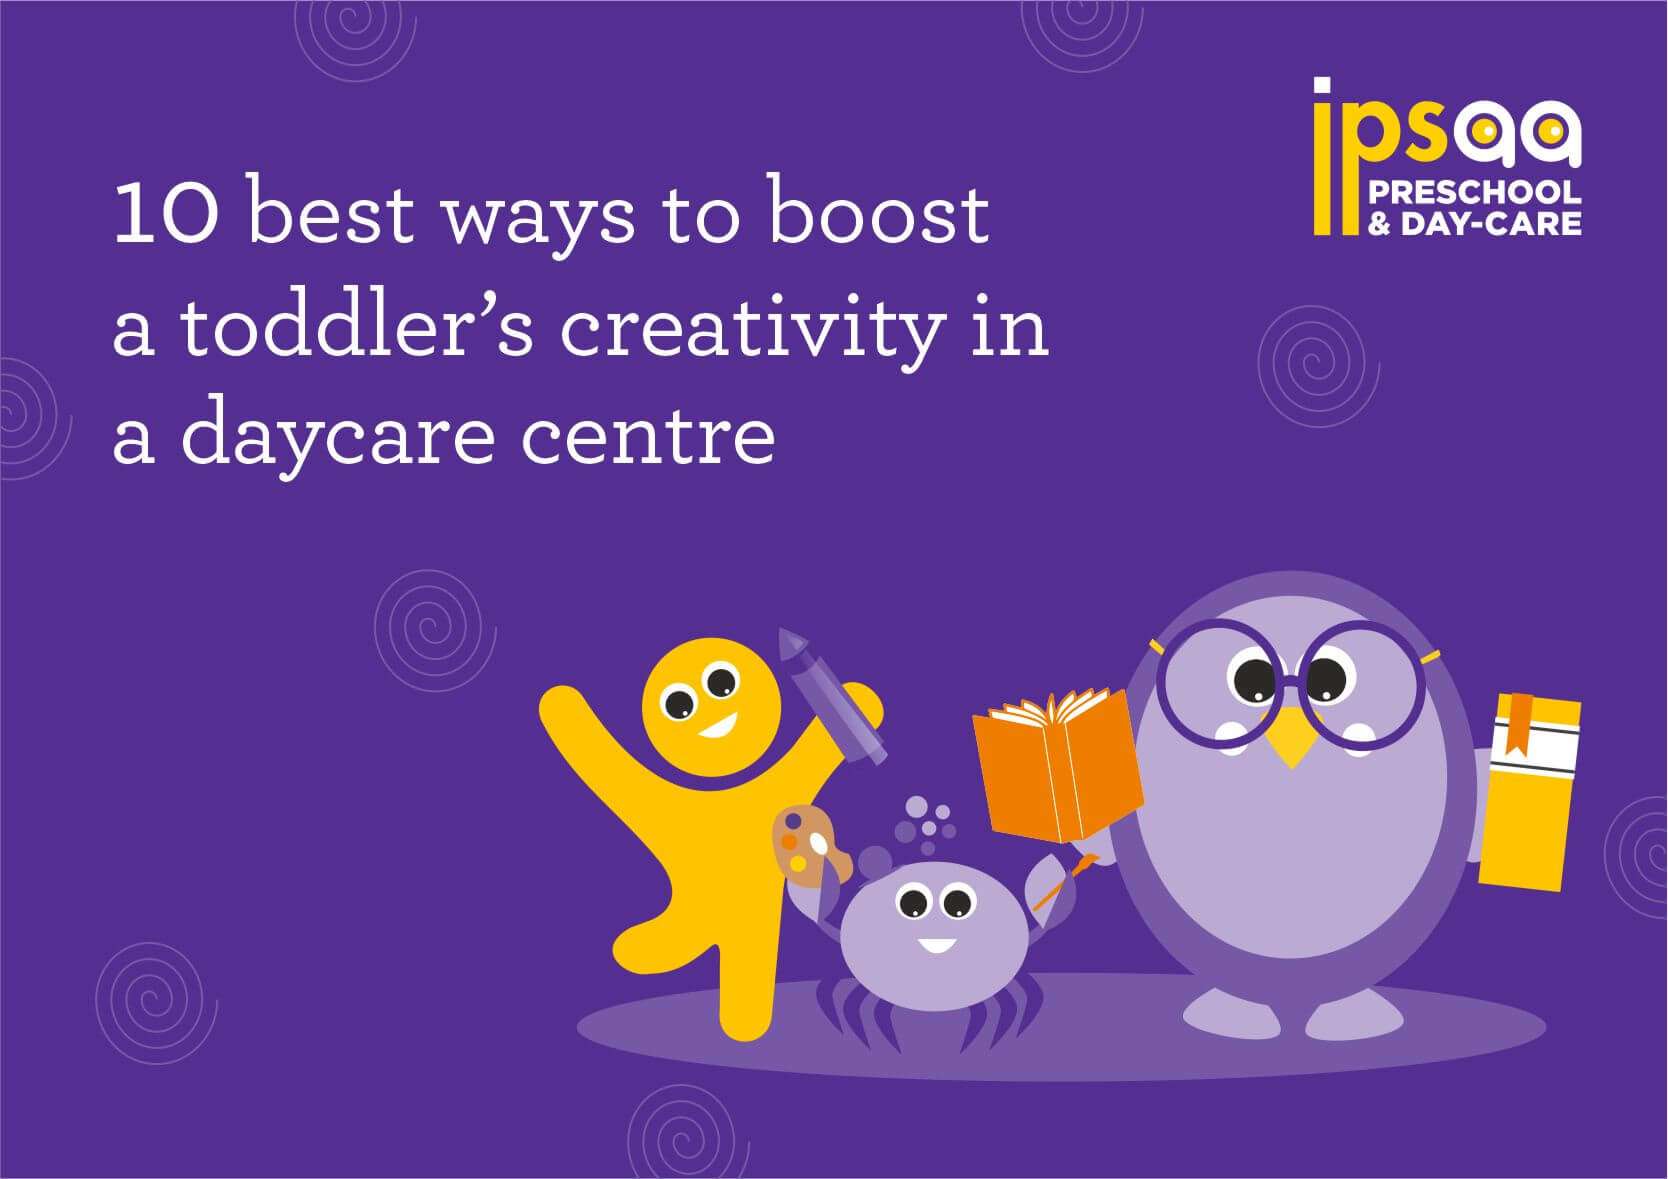 10 Ways to Boost toddlers’ creativity in daycare